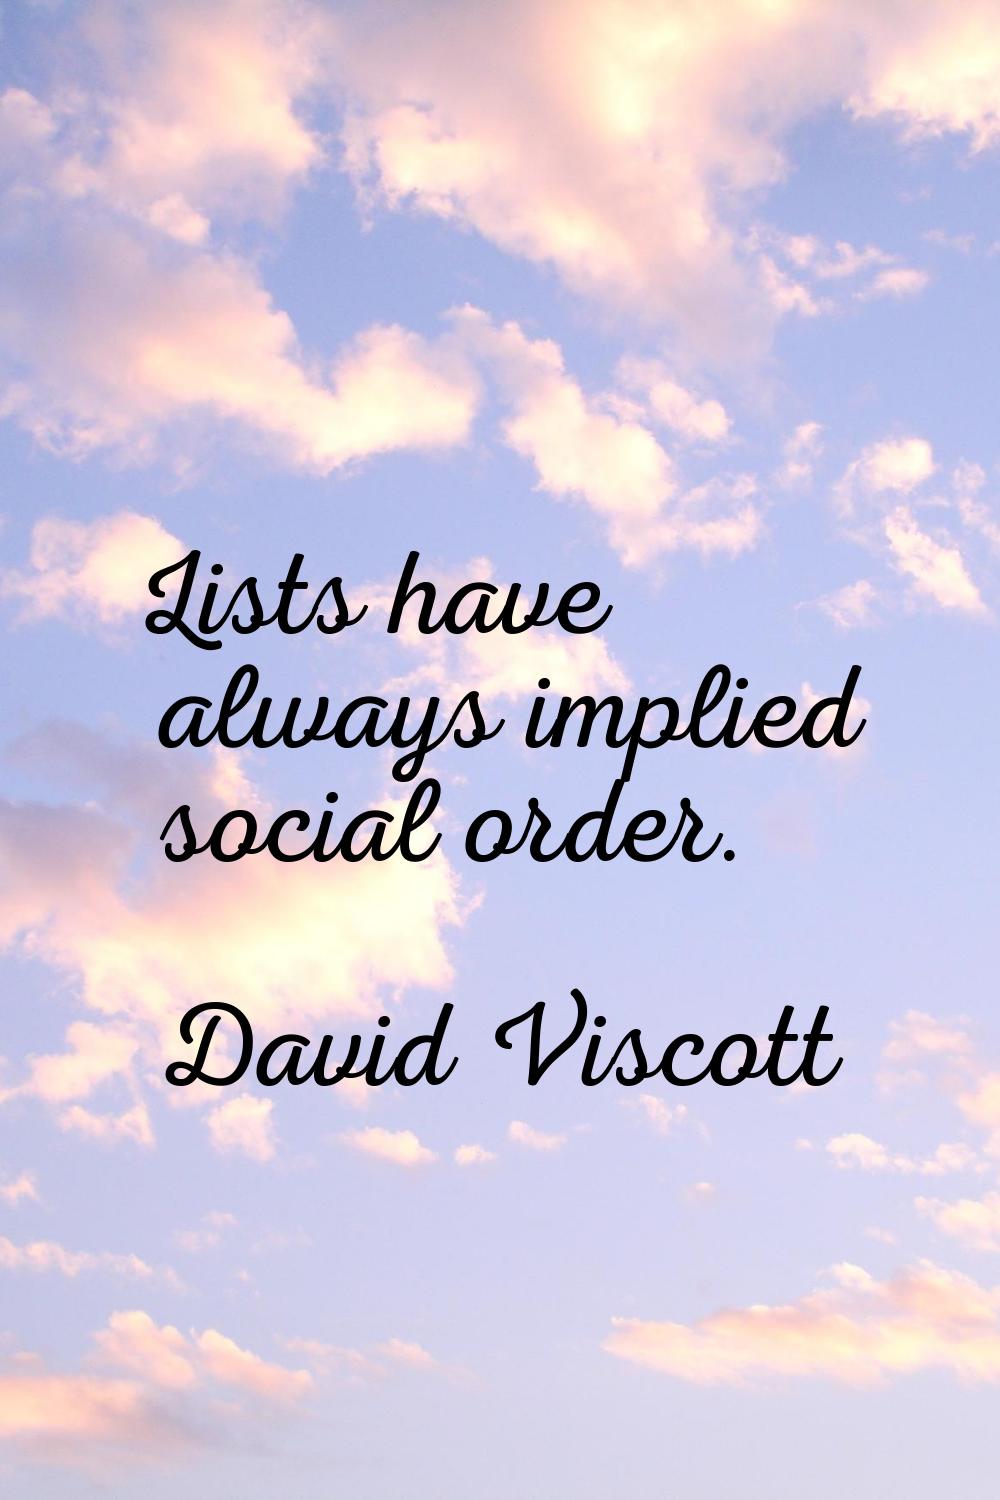 Lists have always implied social order.